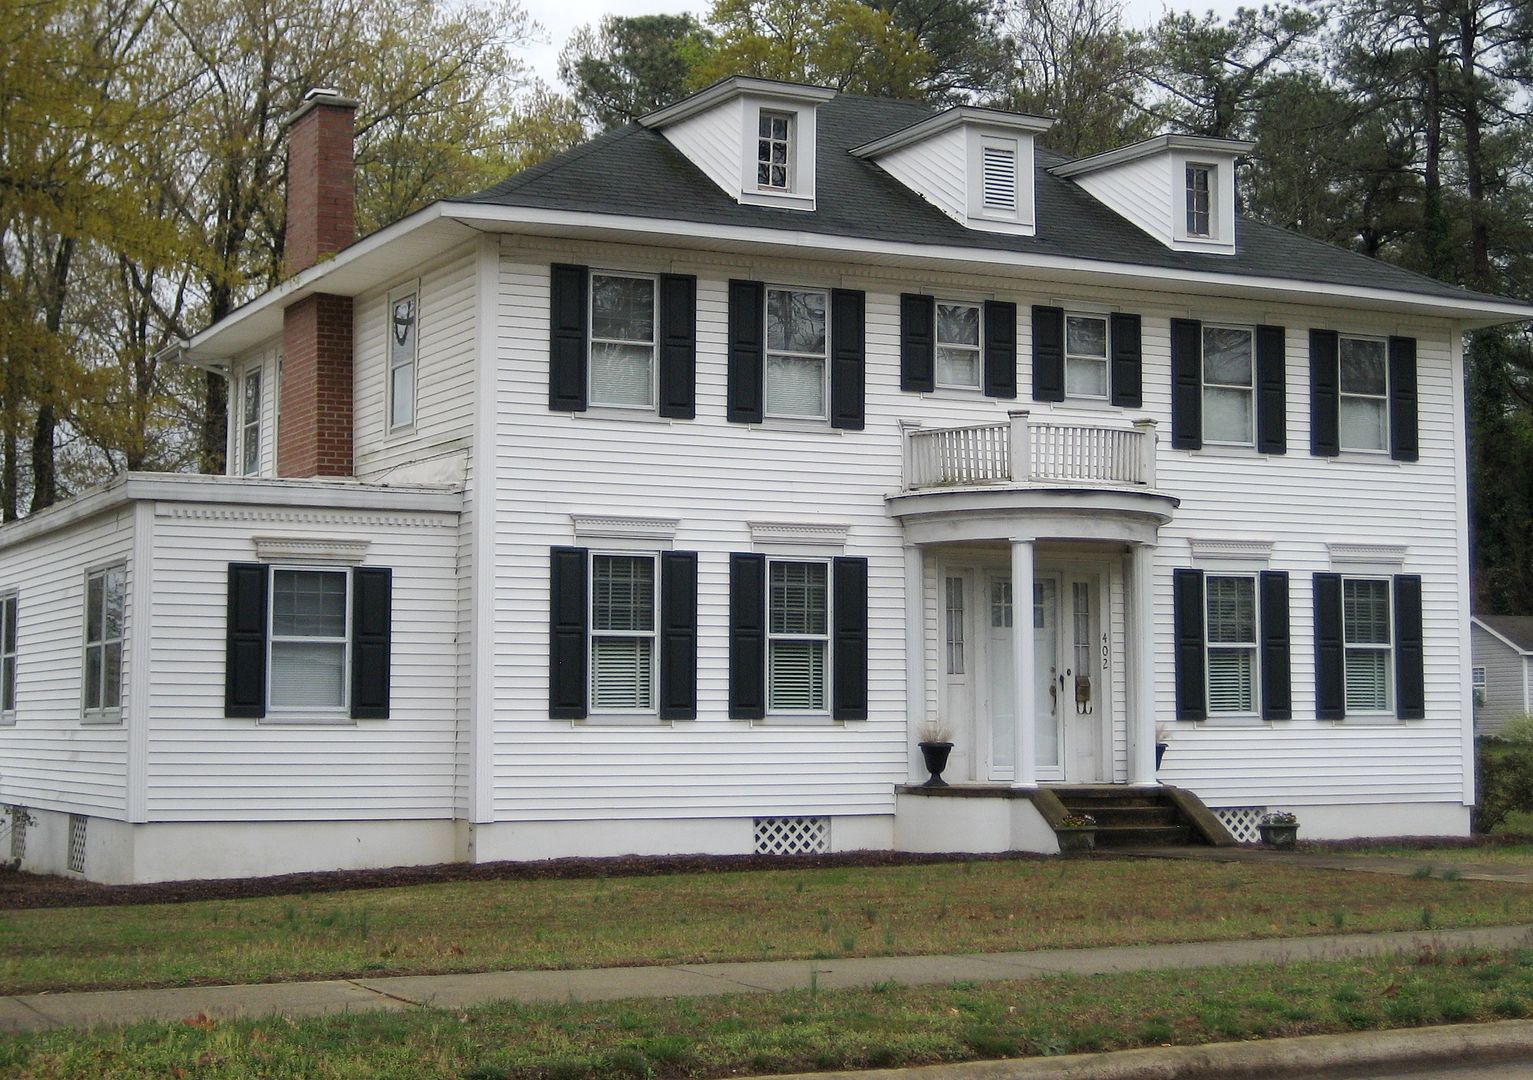 Heres an Aladdin Colonial in Roanoke Rapids, NC.